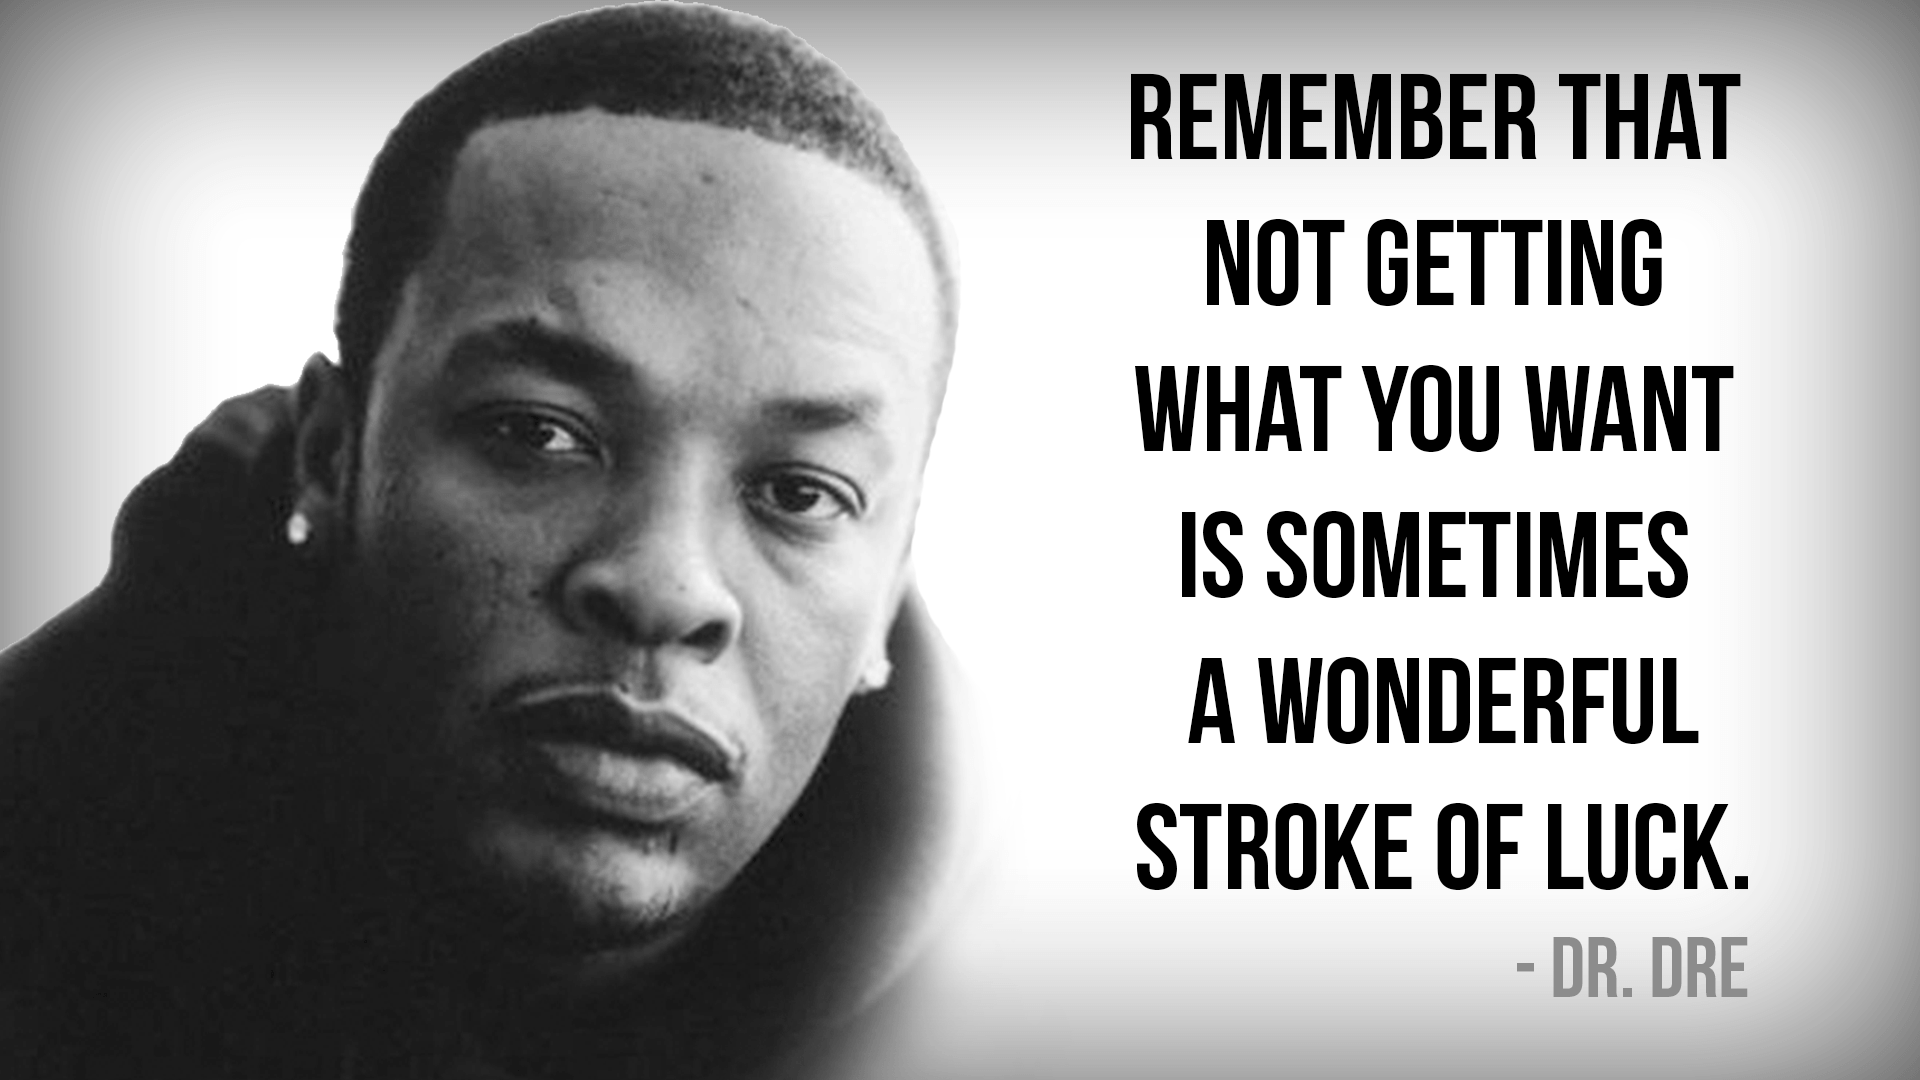 Px Dr Dre Wallpapers-5w597uf - Dr Dre Motivational Quotes - HD Wallpaper 